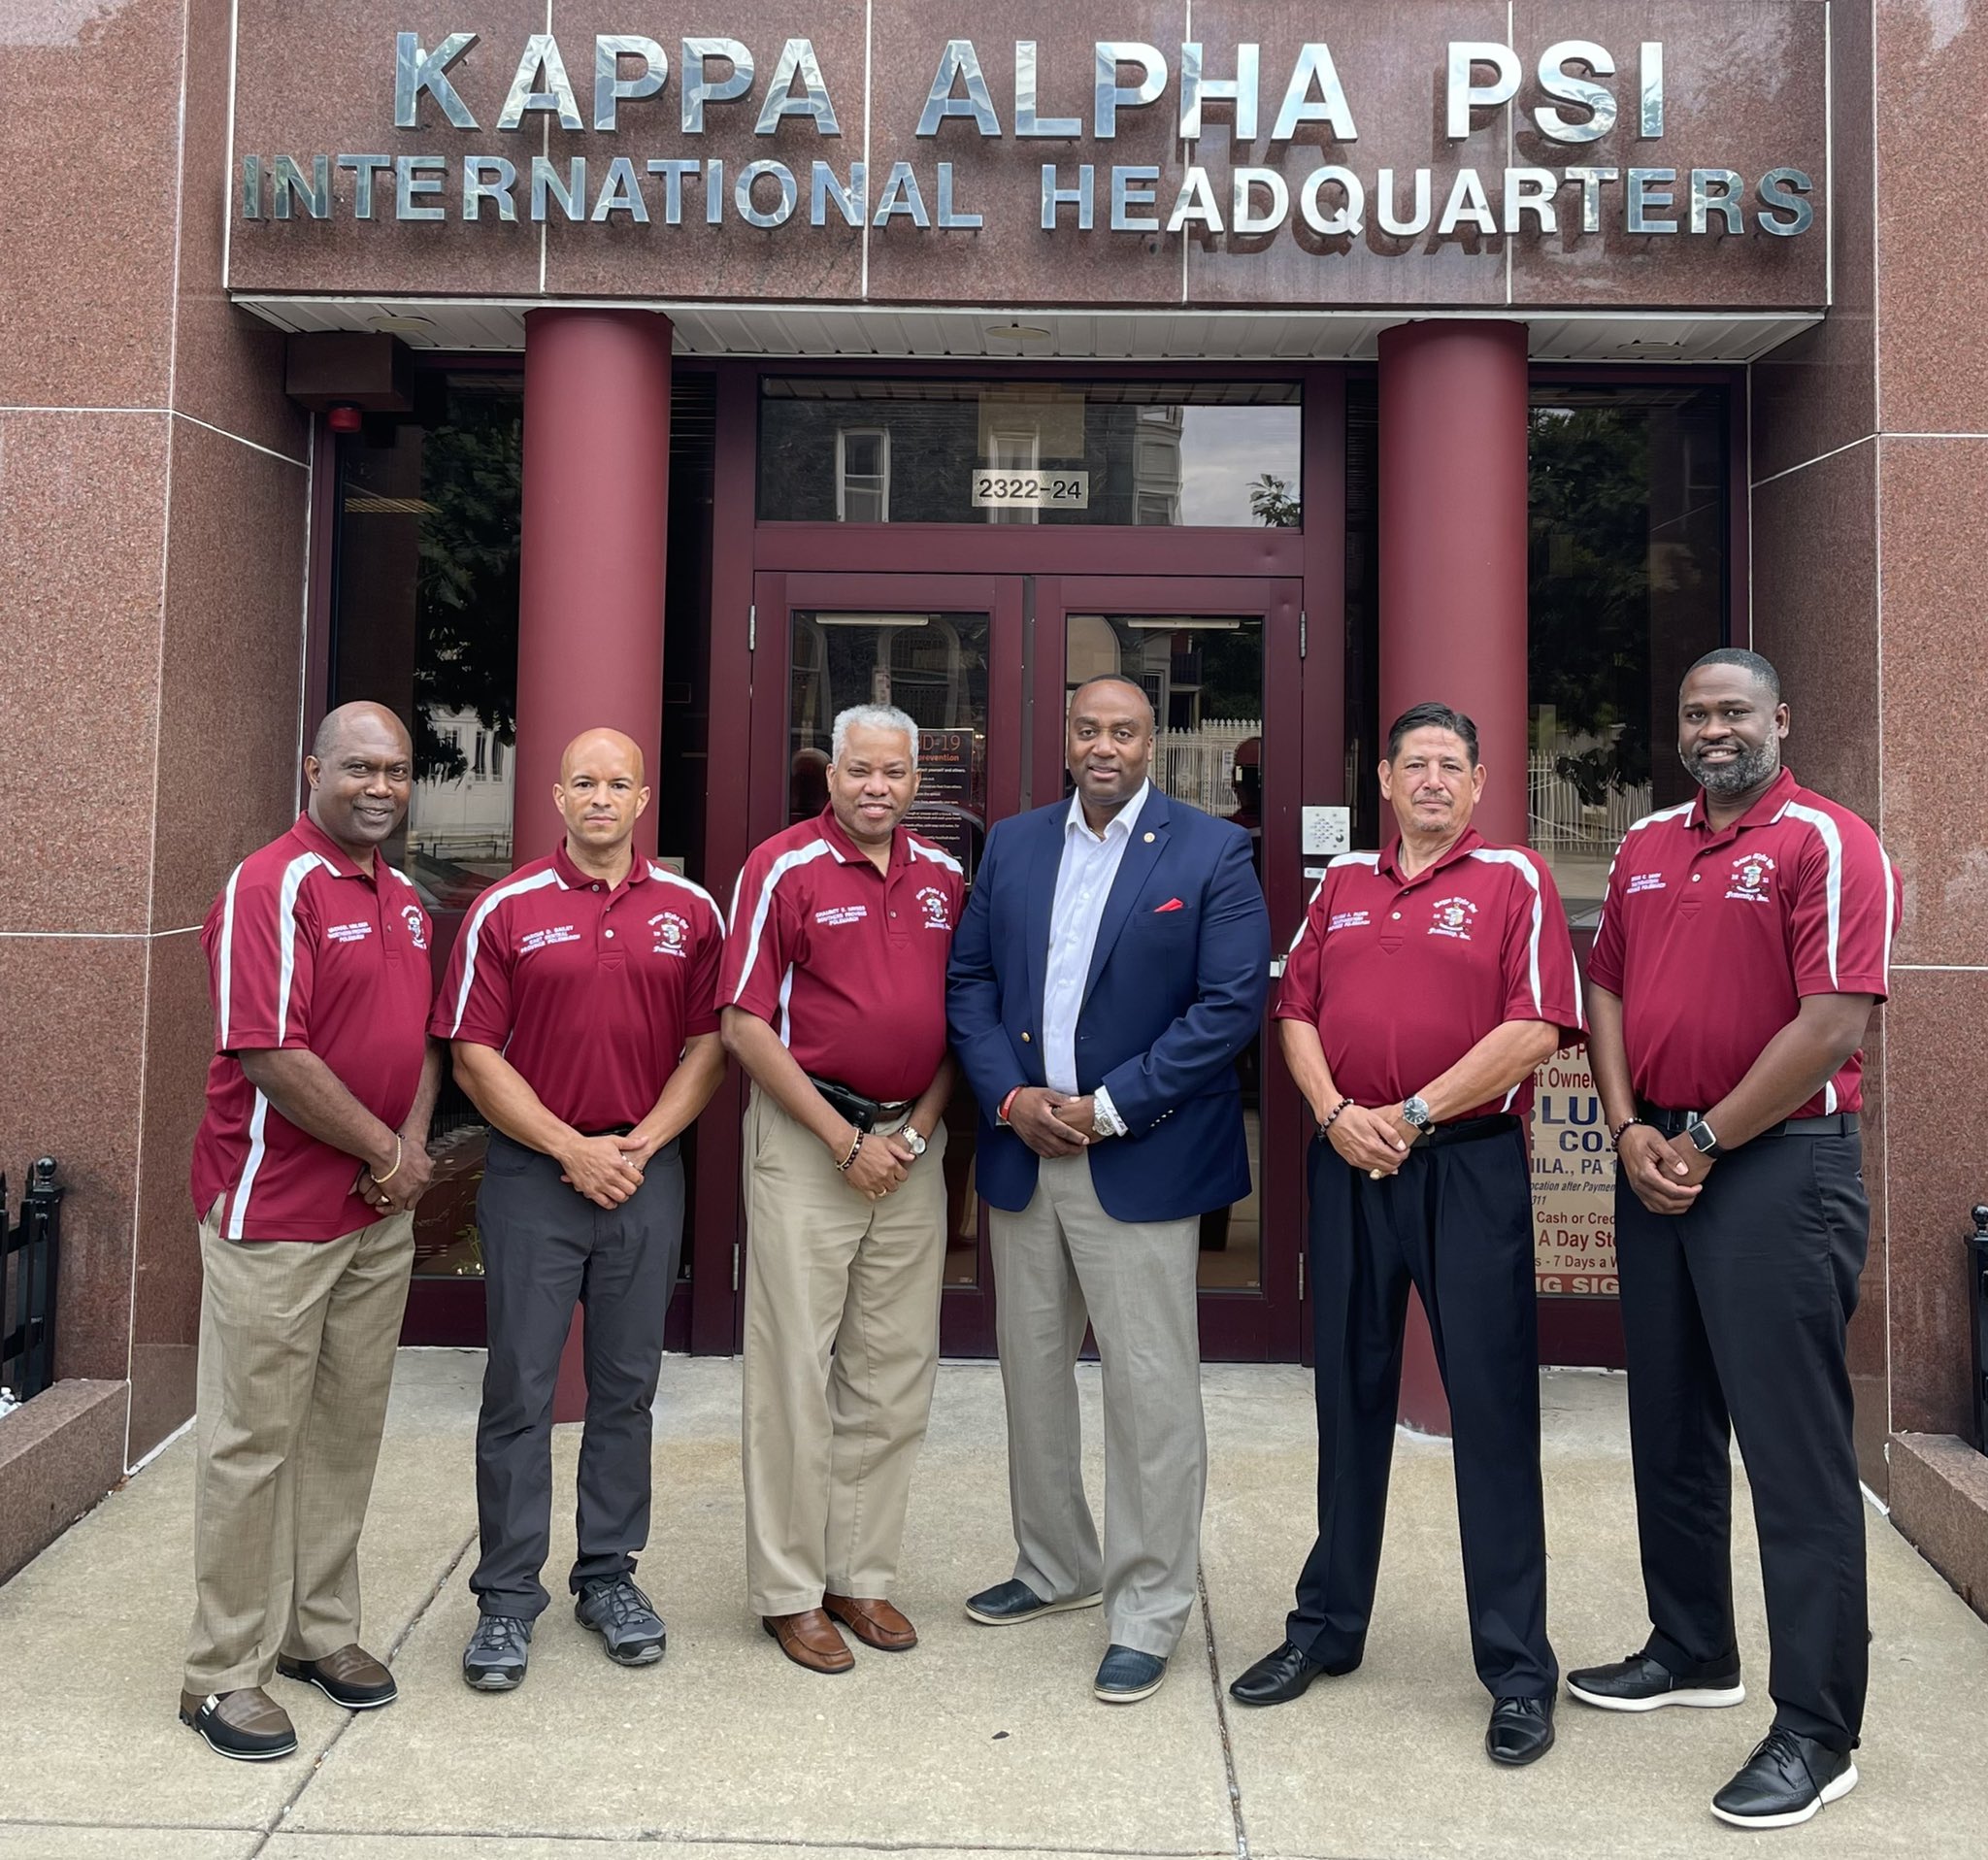 mayor suficiente Chispa  chispear Jimmy McMikle on Twitter: "Join me in congratulating the five new Province  Polemarchs (Regional Presidents) of Kappa Alpha Psi Fraternity, Inc. It was  great to spend a couple days with them at